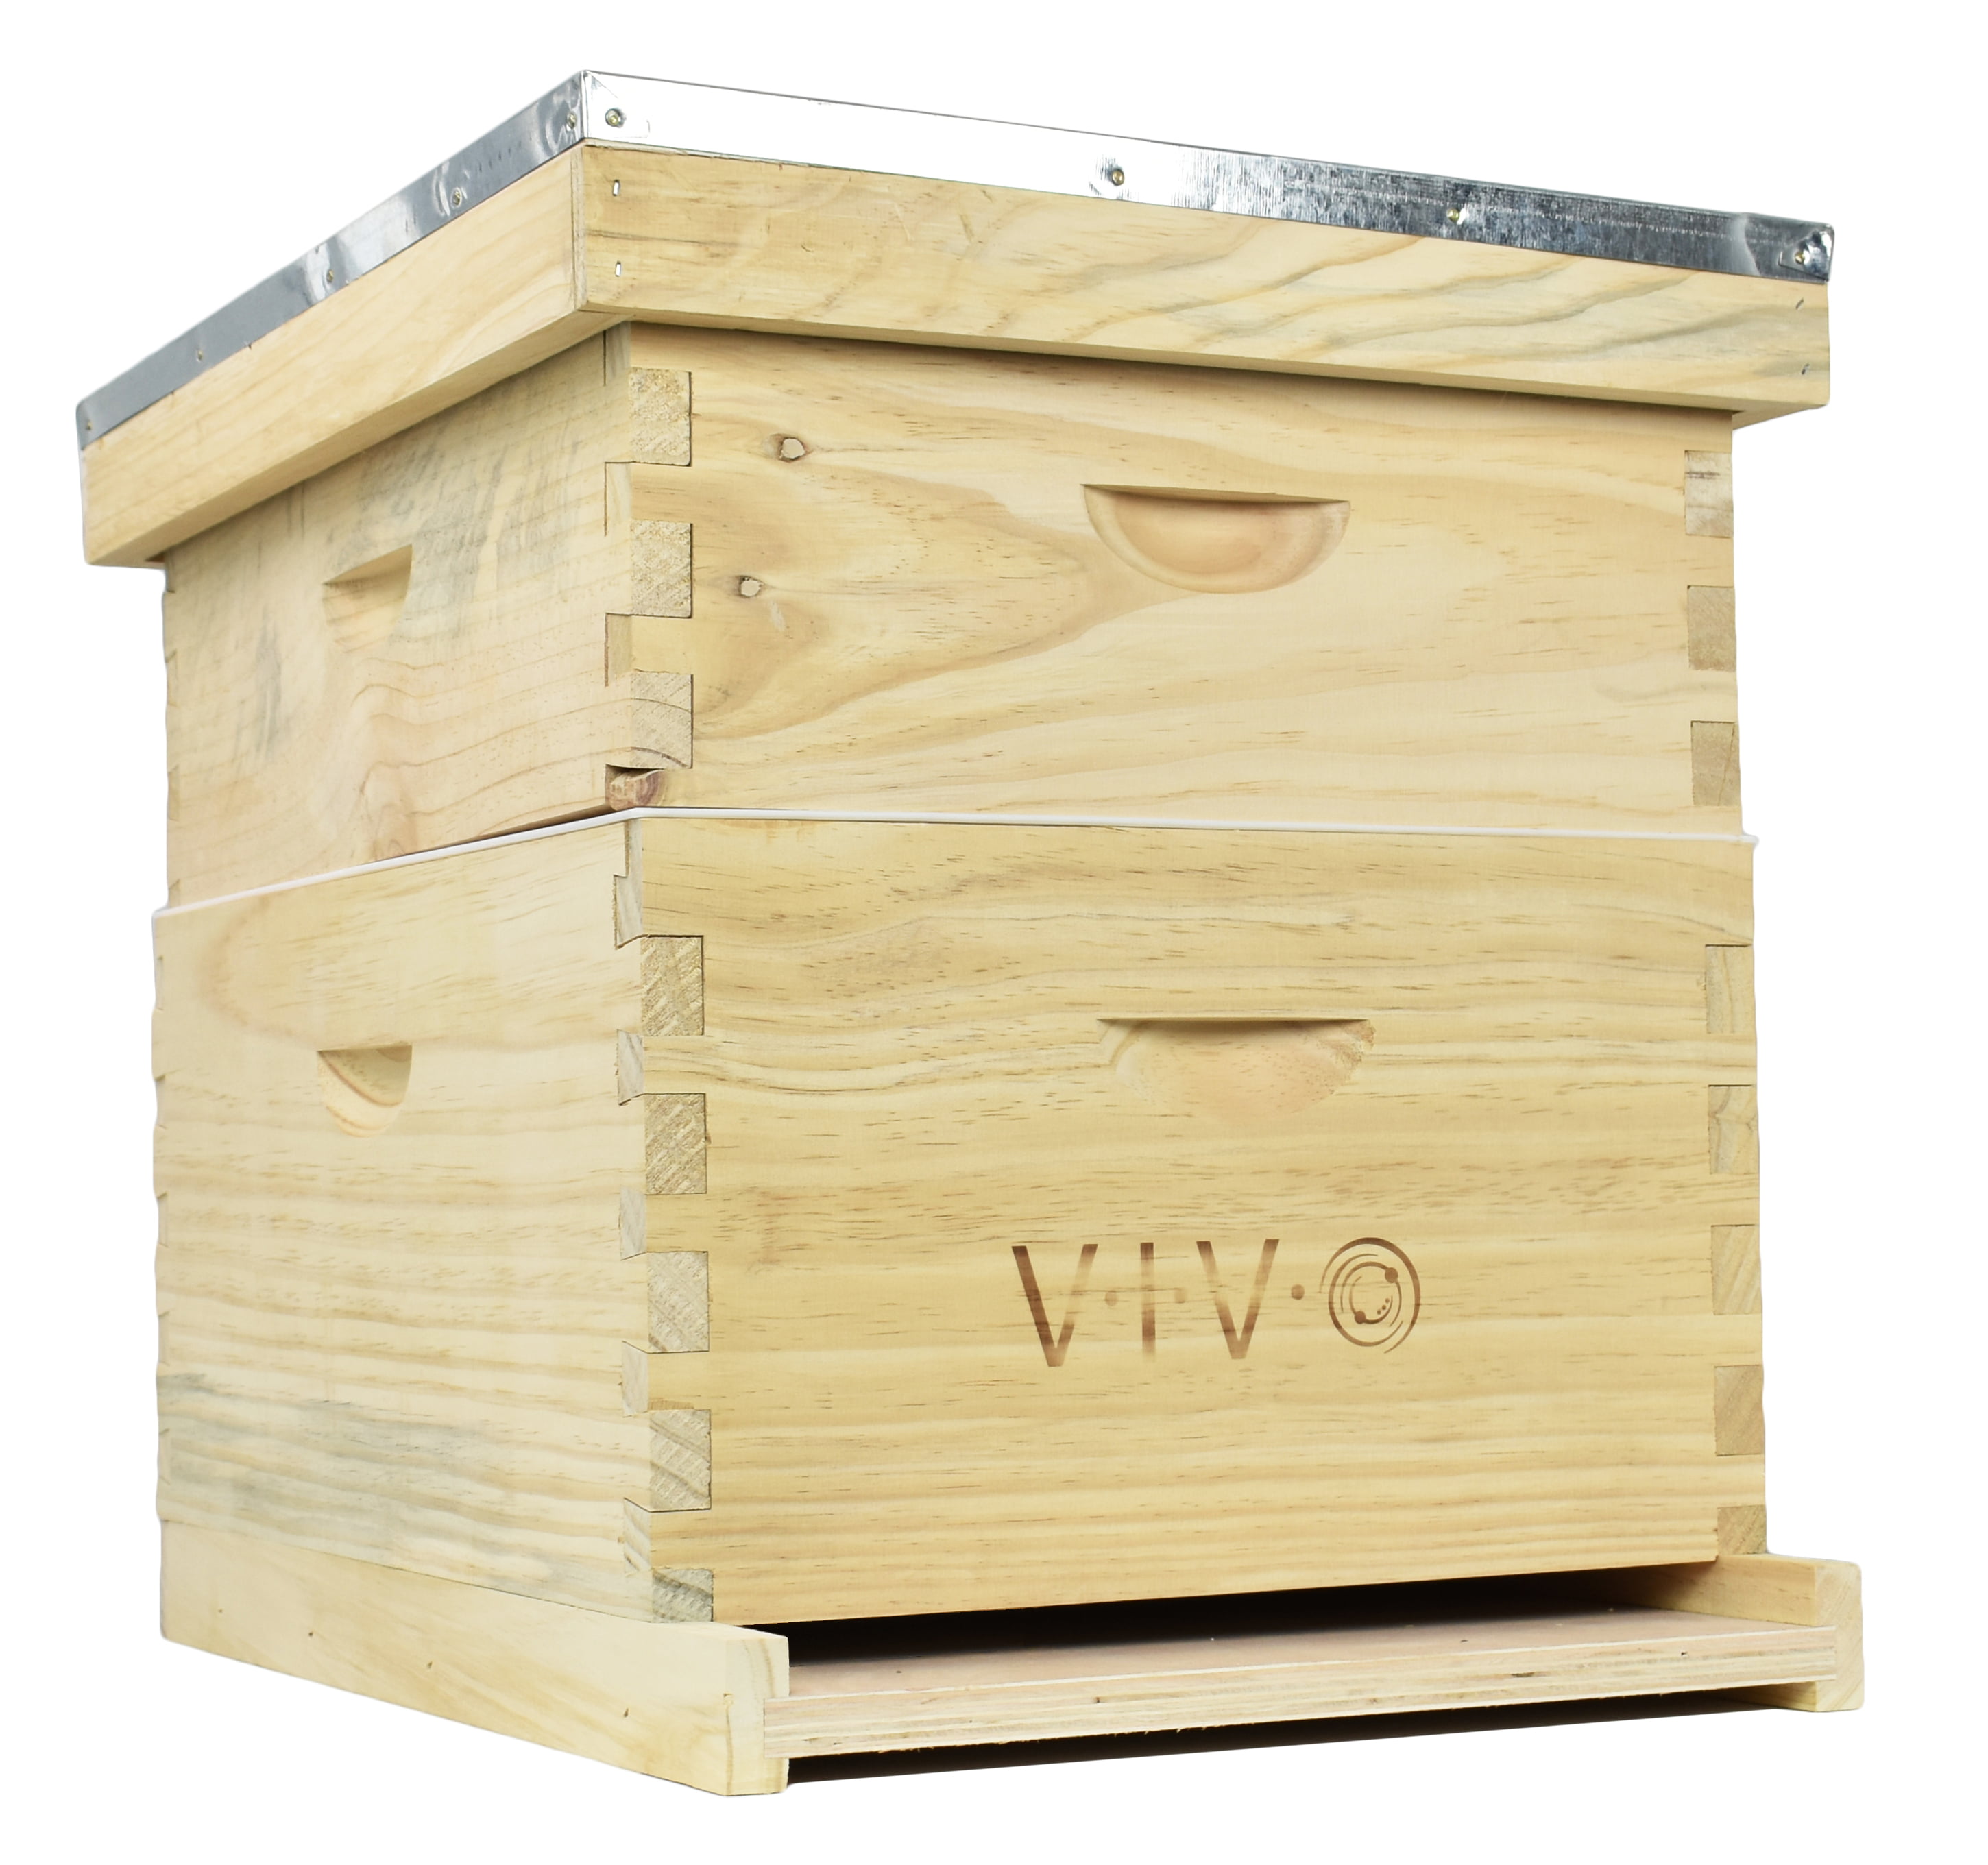 Honey Keeper L20 Beehive 20 Frame Complete Box Kit with Metal Roof for sale online 